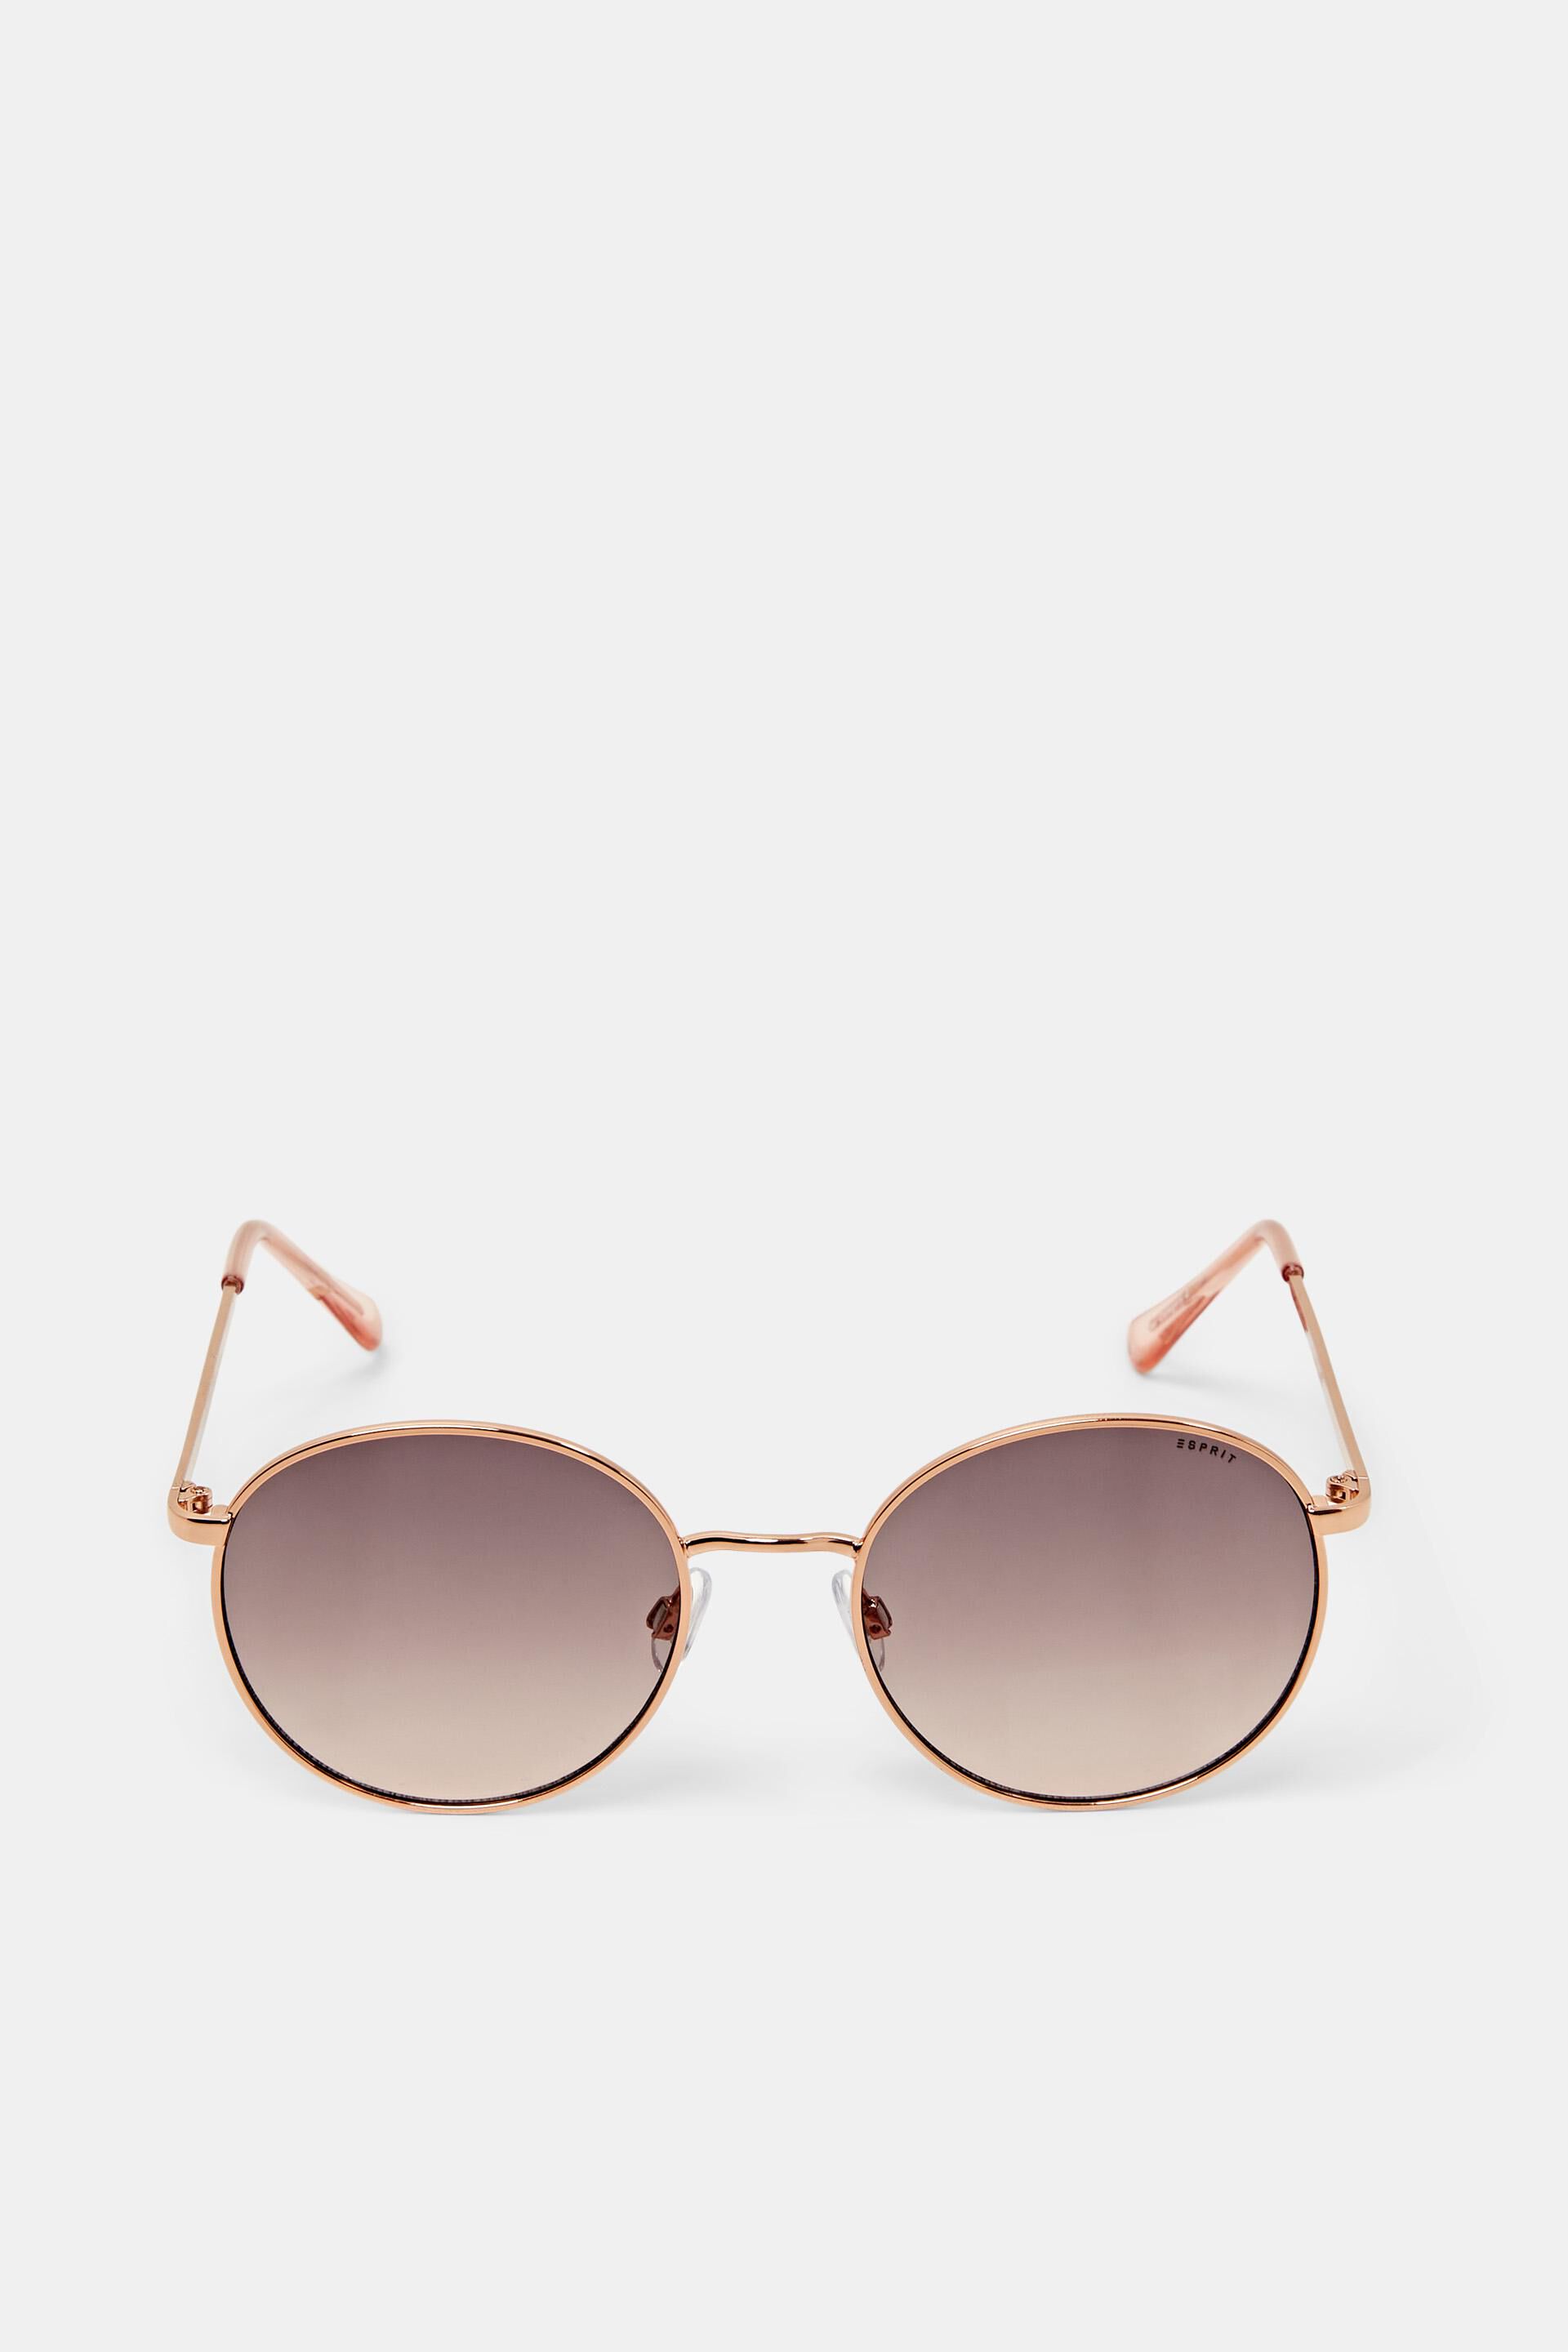 Esprit Online Store Sunglasses with metal frames